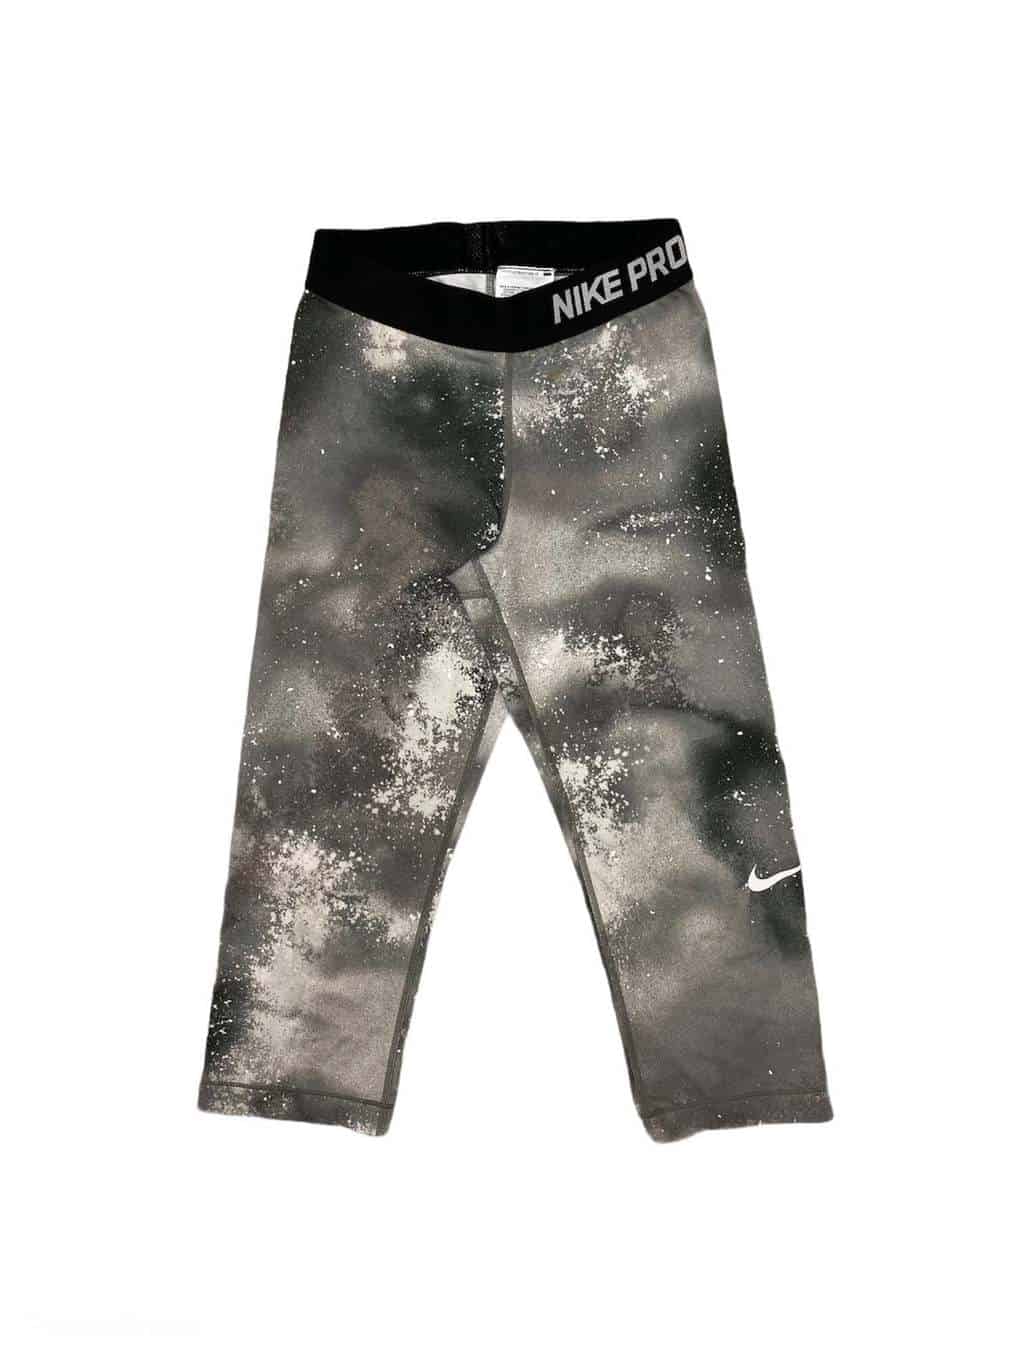 Patagonia Black & Grey Abstract Cropped athletic Leggings Size